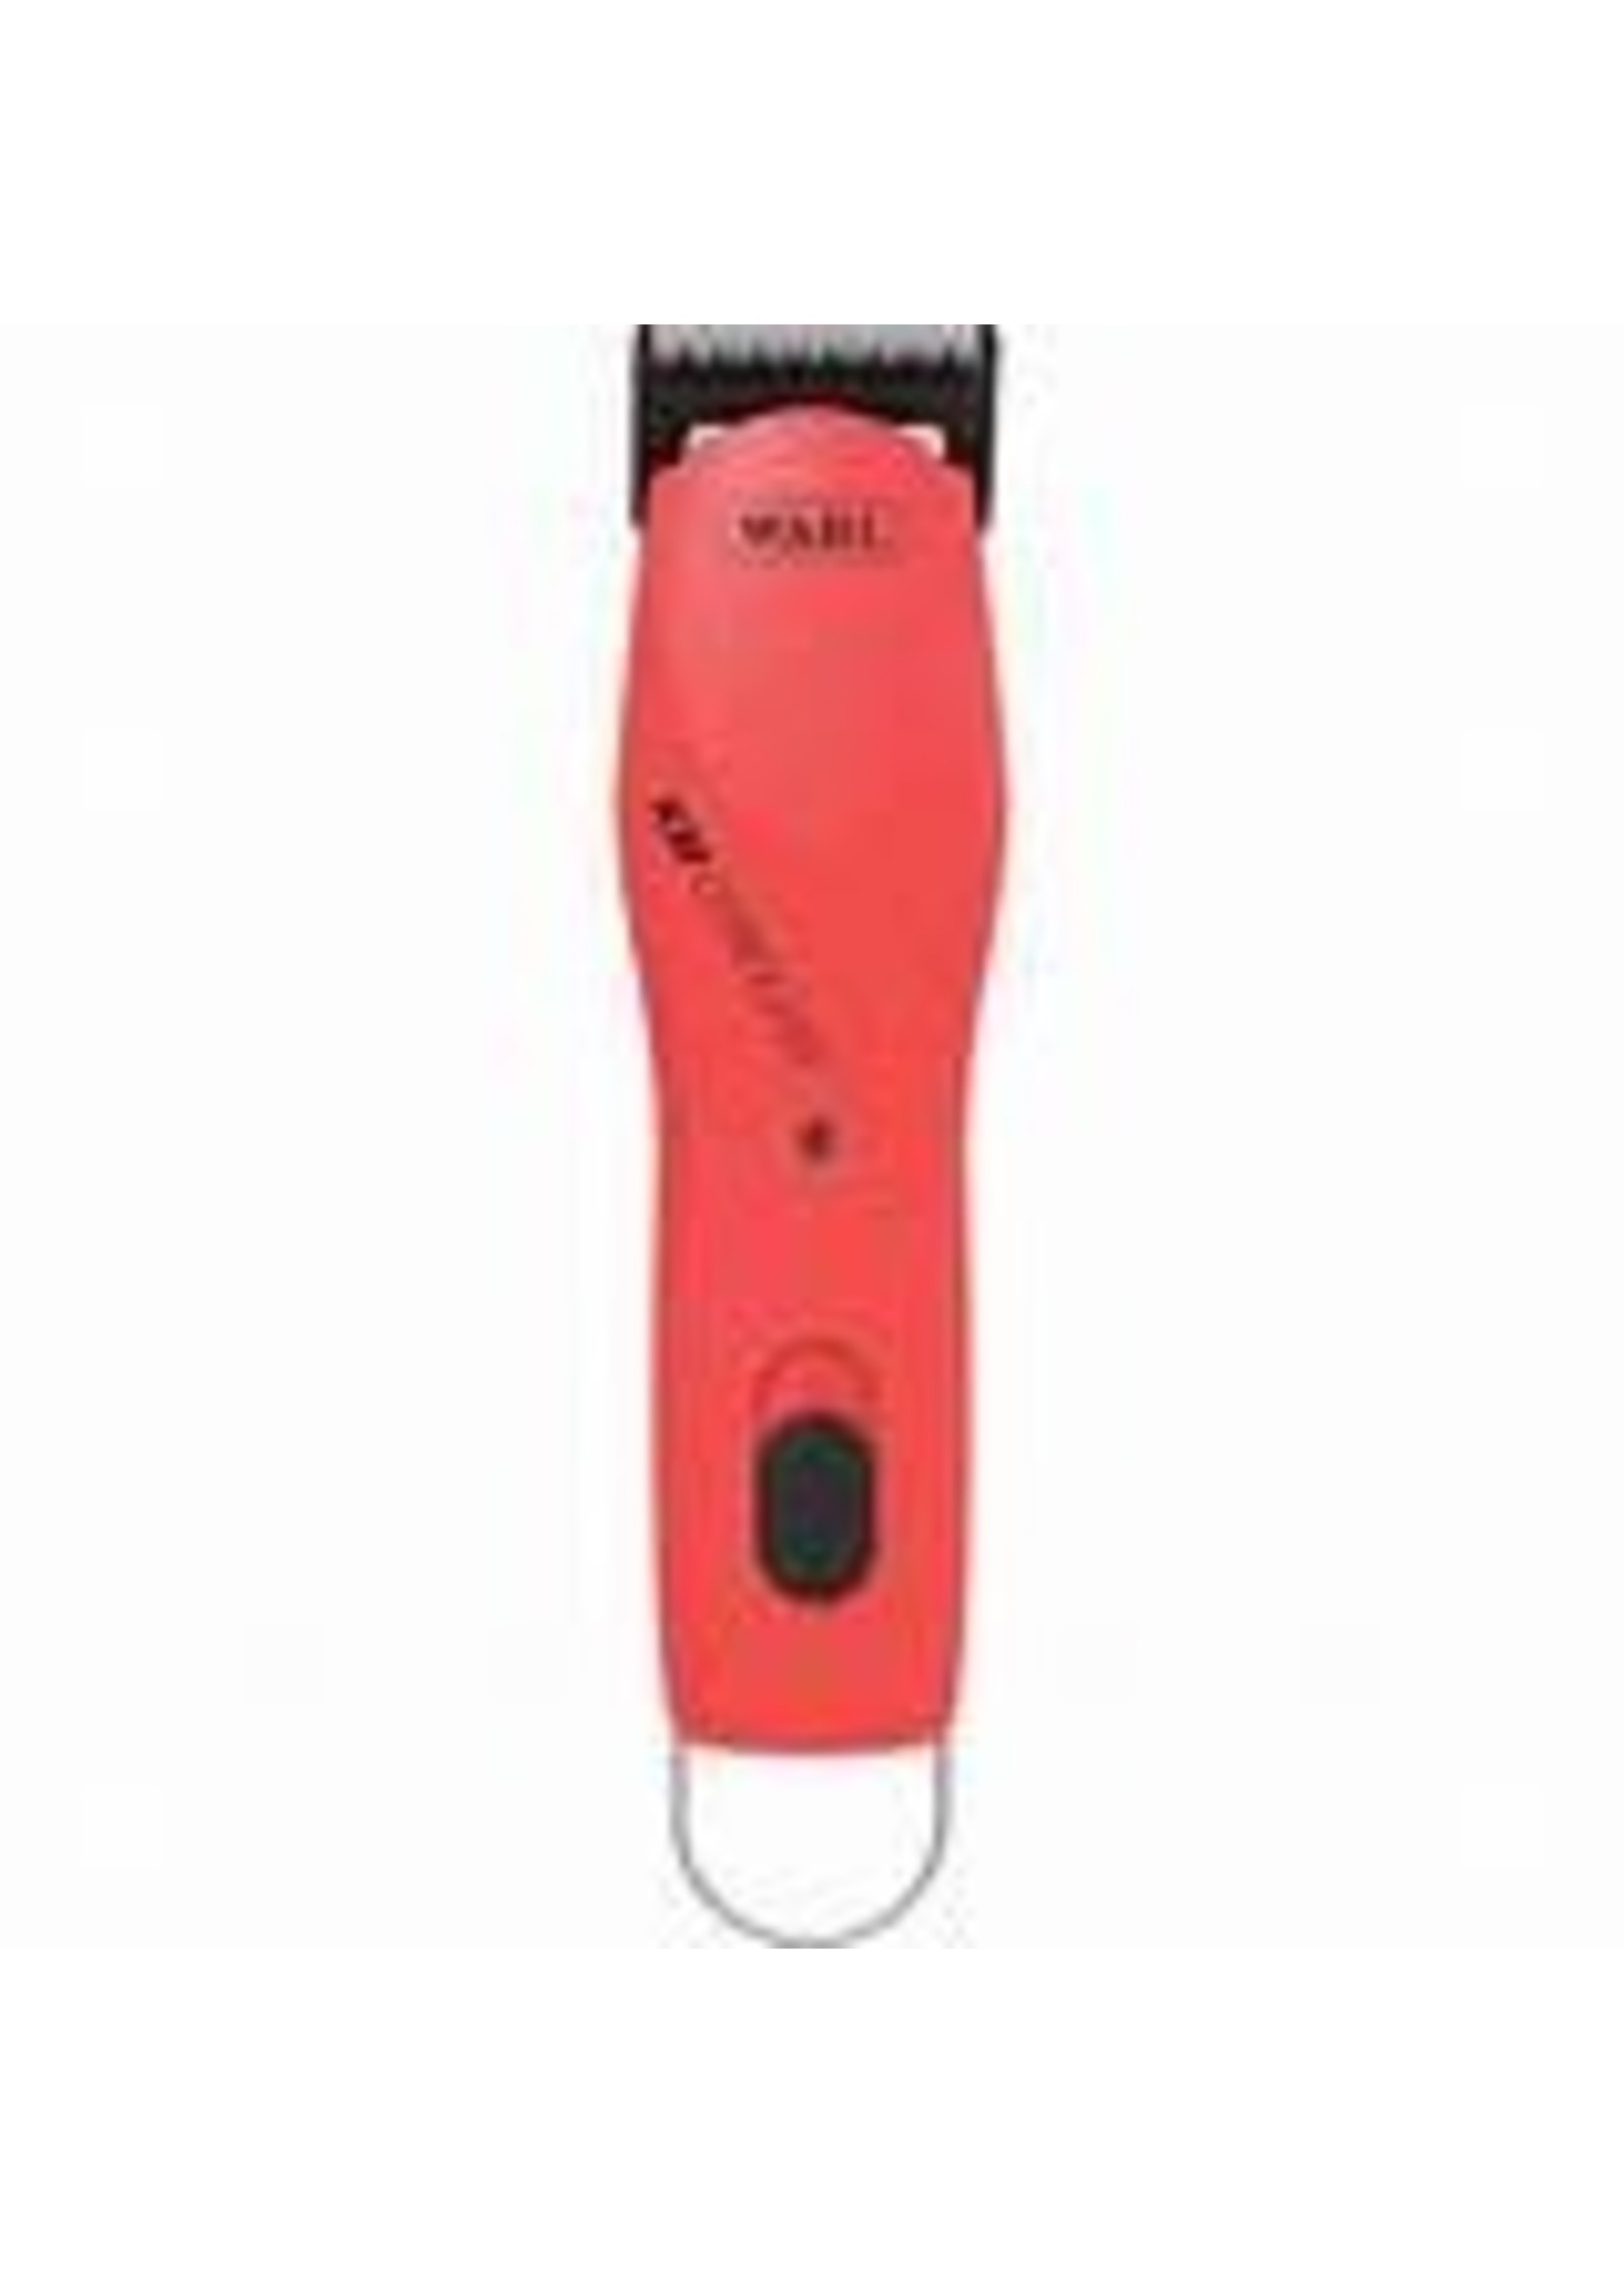 Wahl Wahl KM Cordless 2 Speed-Red